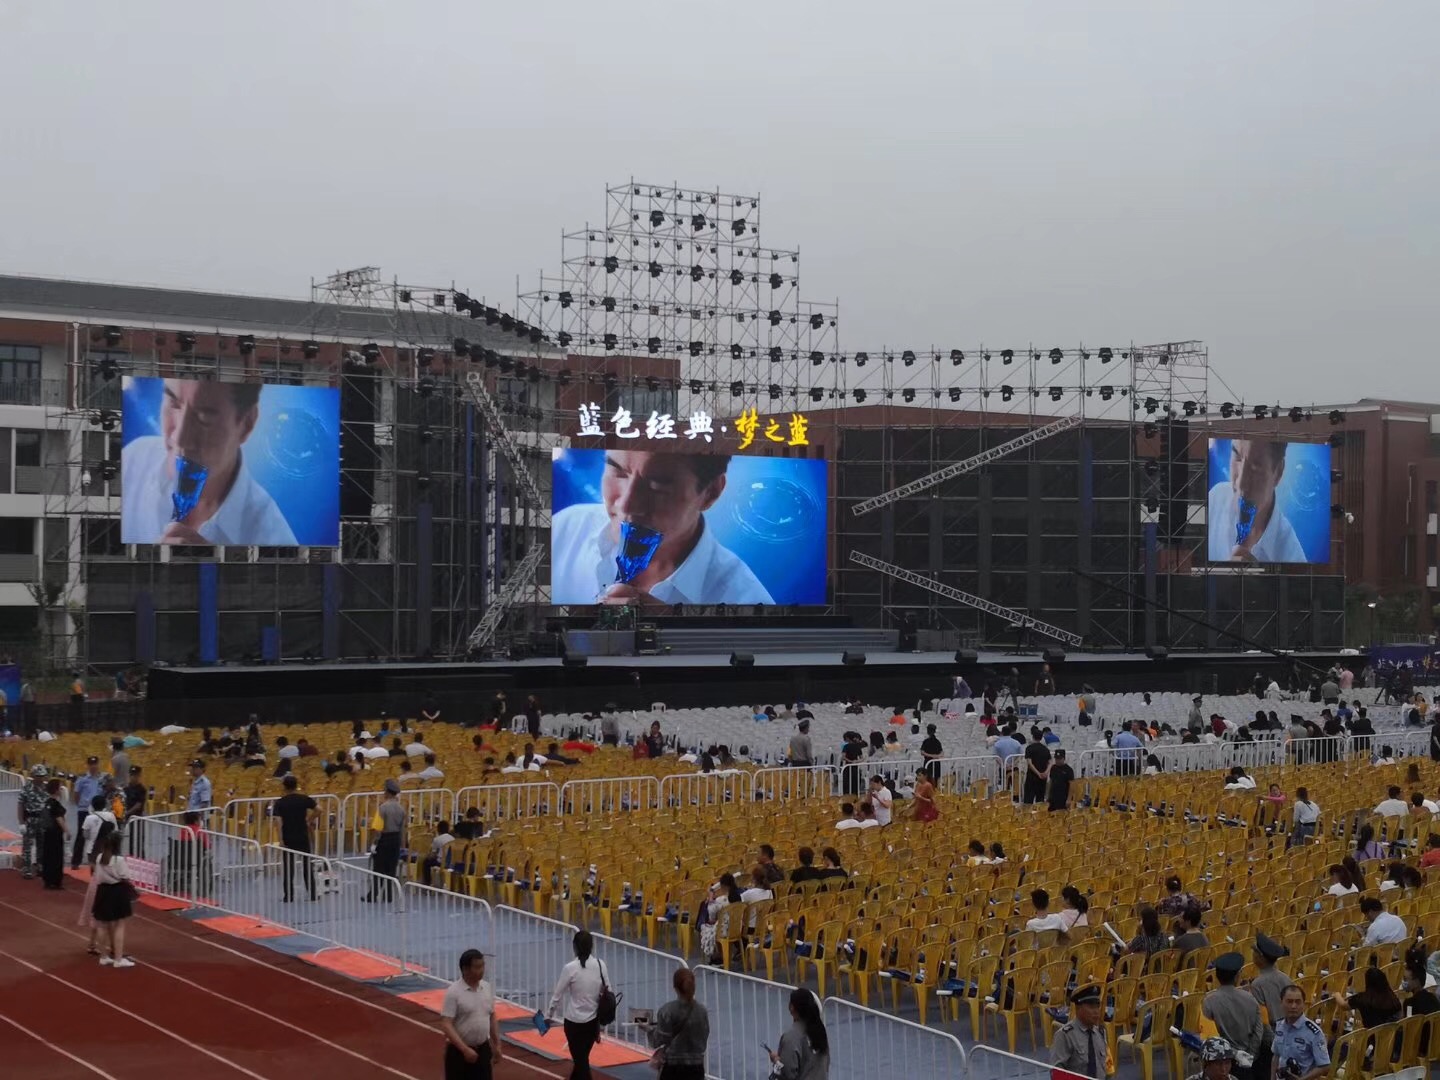 Outdoor full color LED display in gymnasium